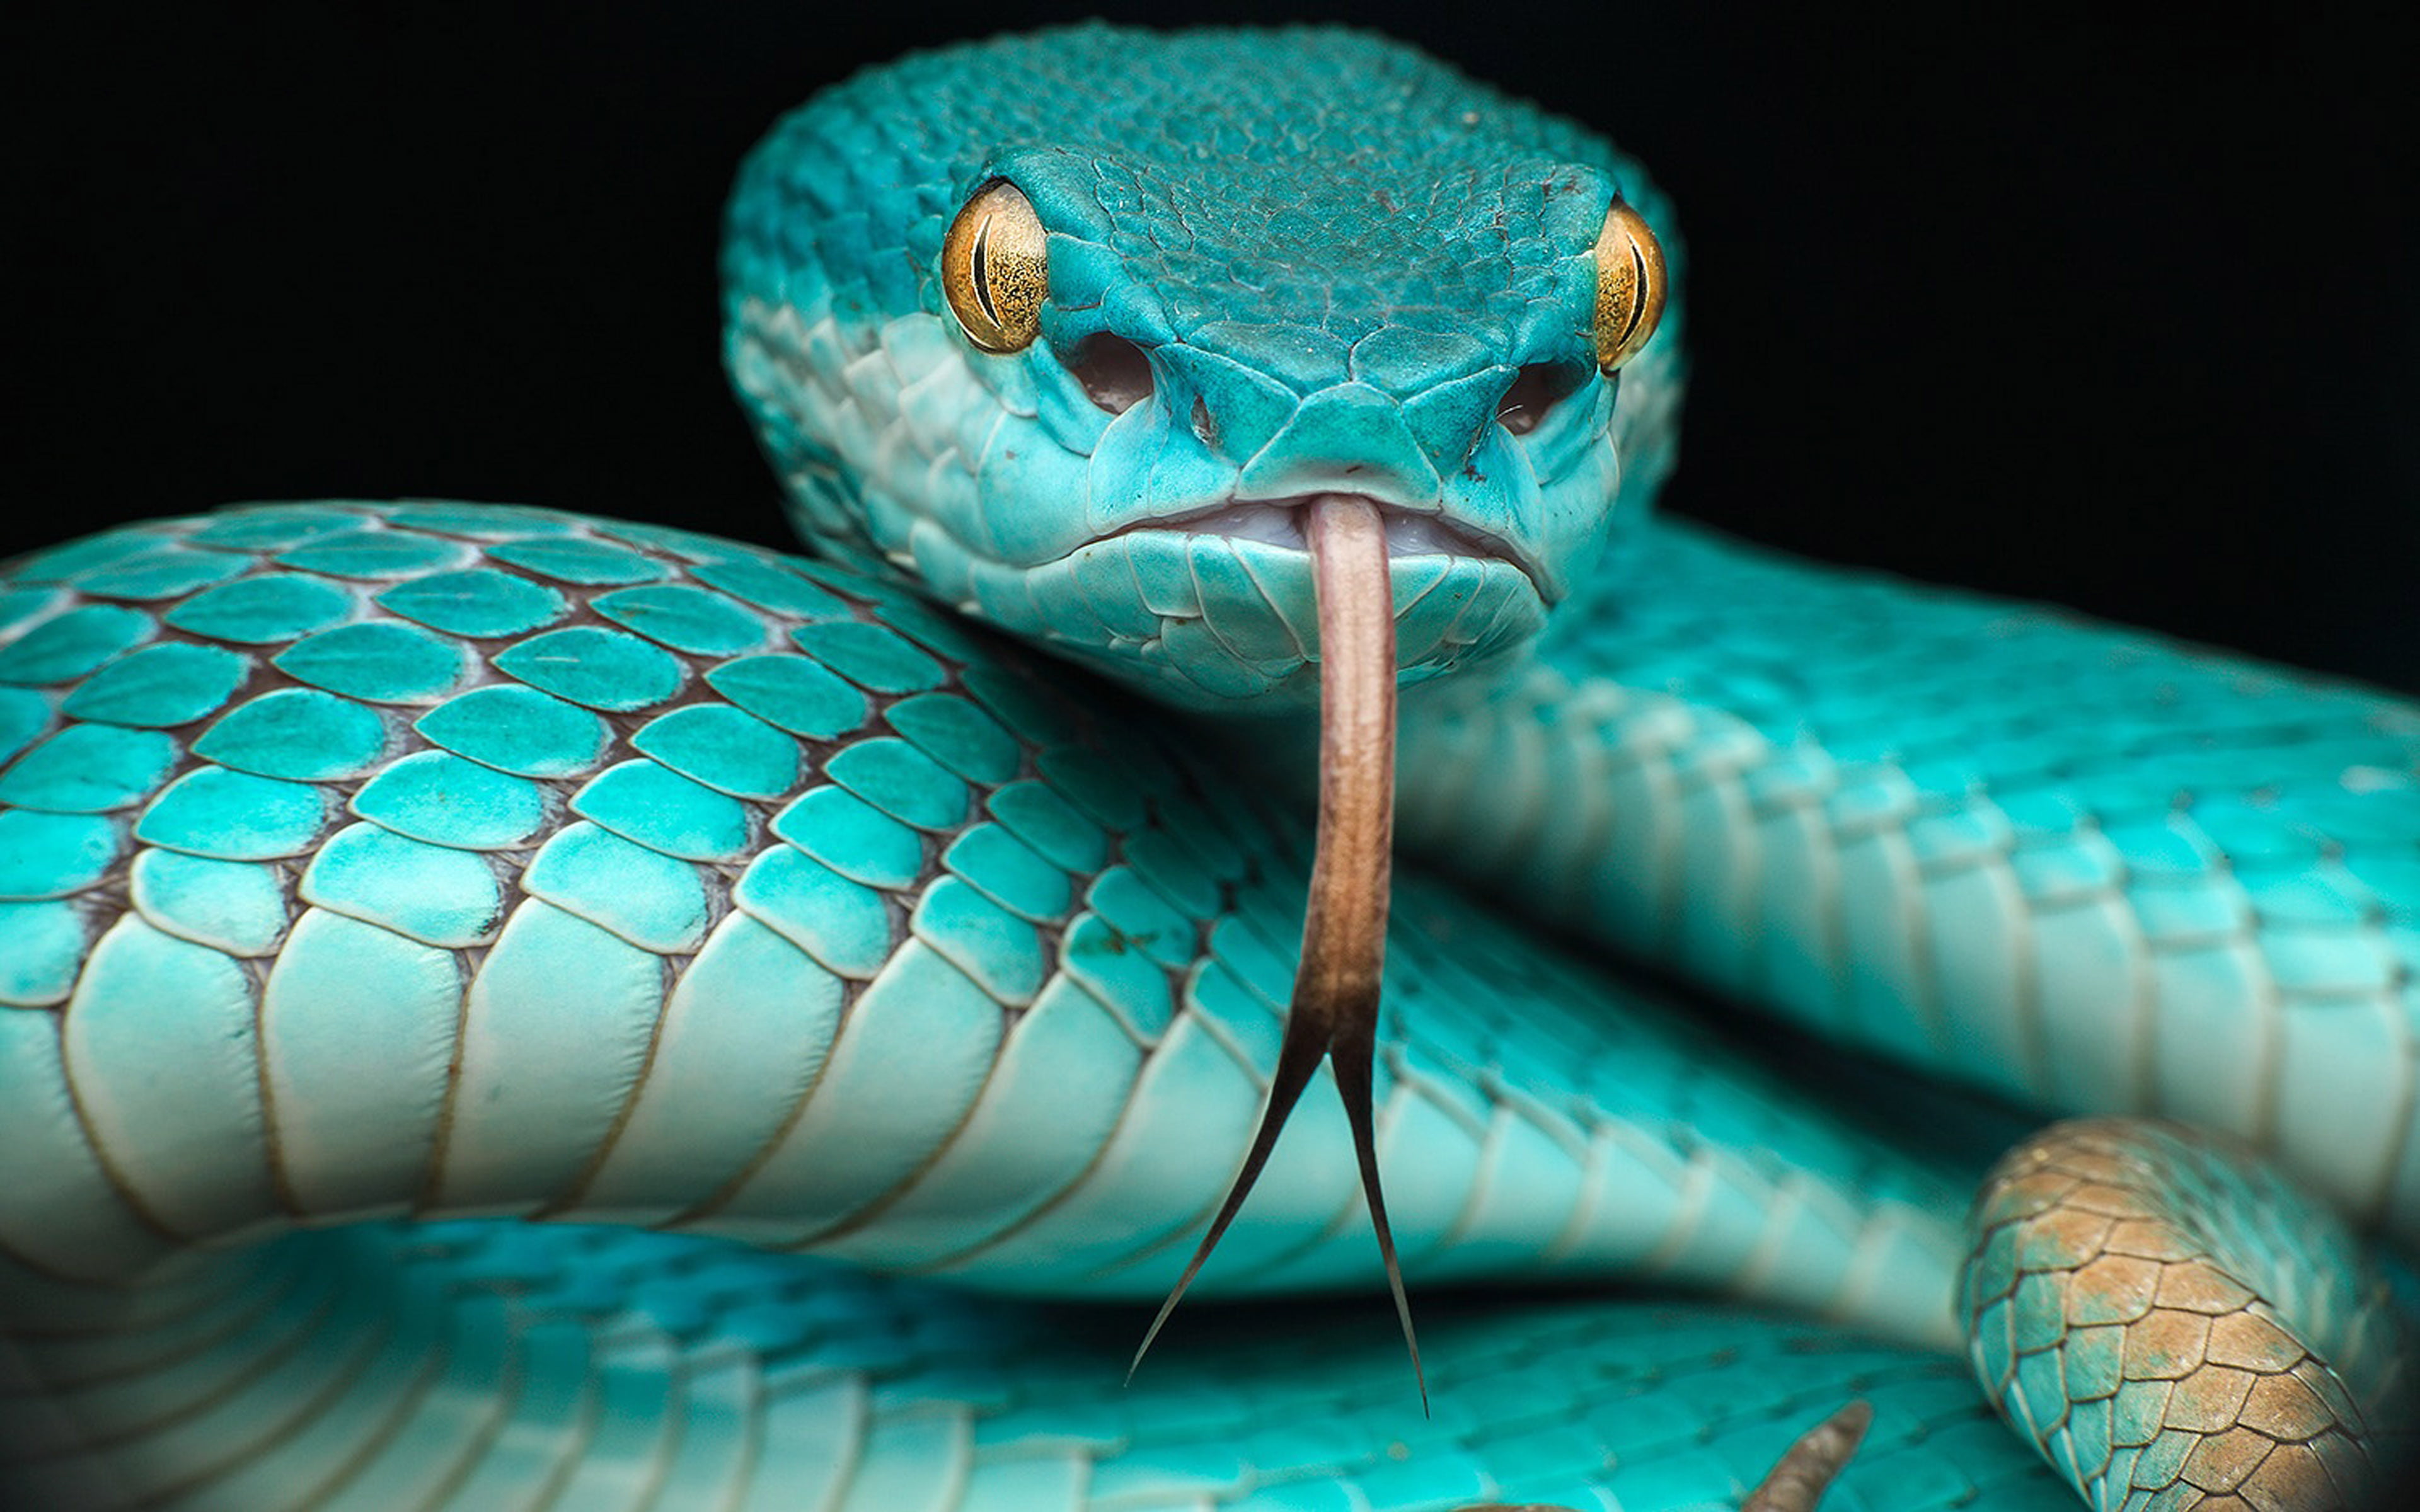 Trimeresurus Albolabris Insularis Reptile Japanese Blue Poison Snake In Indonesia And East Timor Hd Wallpapers For Desktop Mobile Phones And Laptop 3840×2400